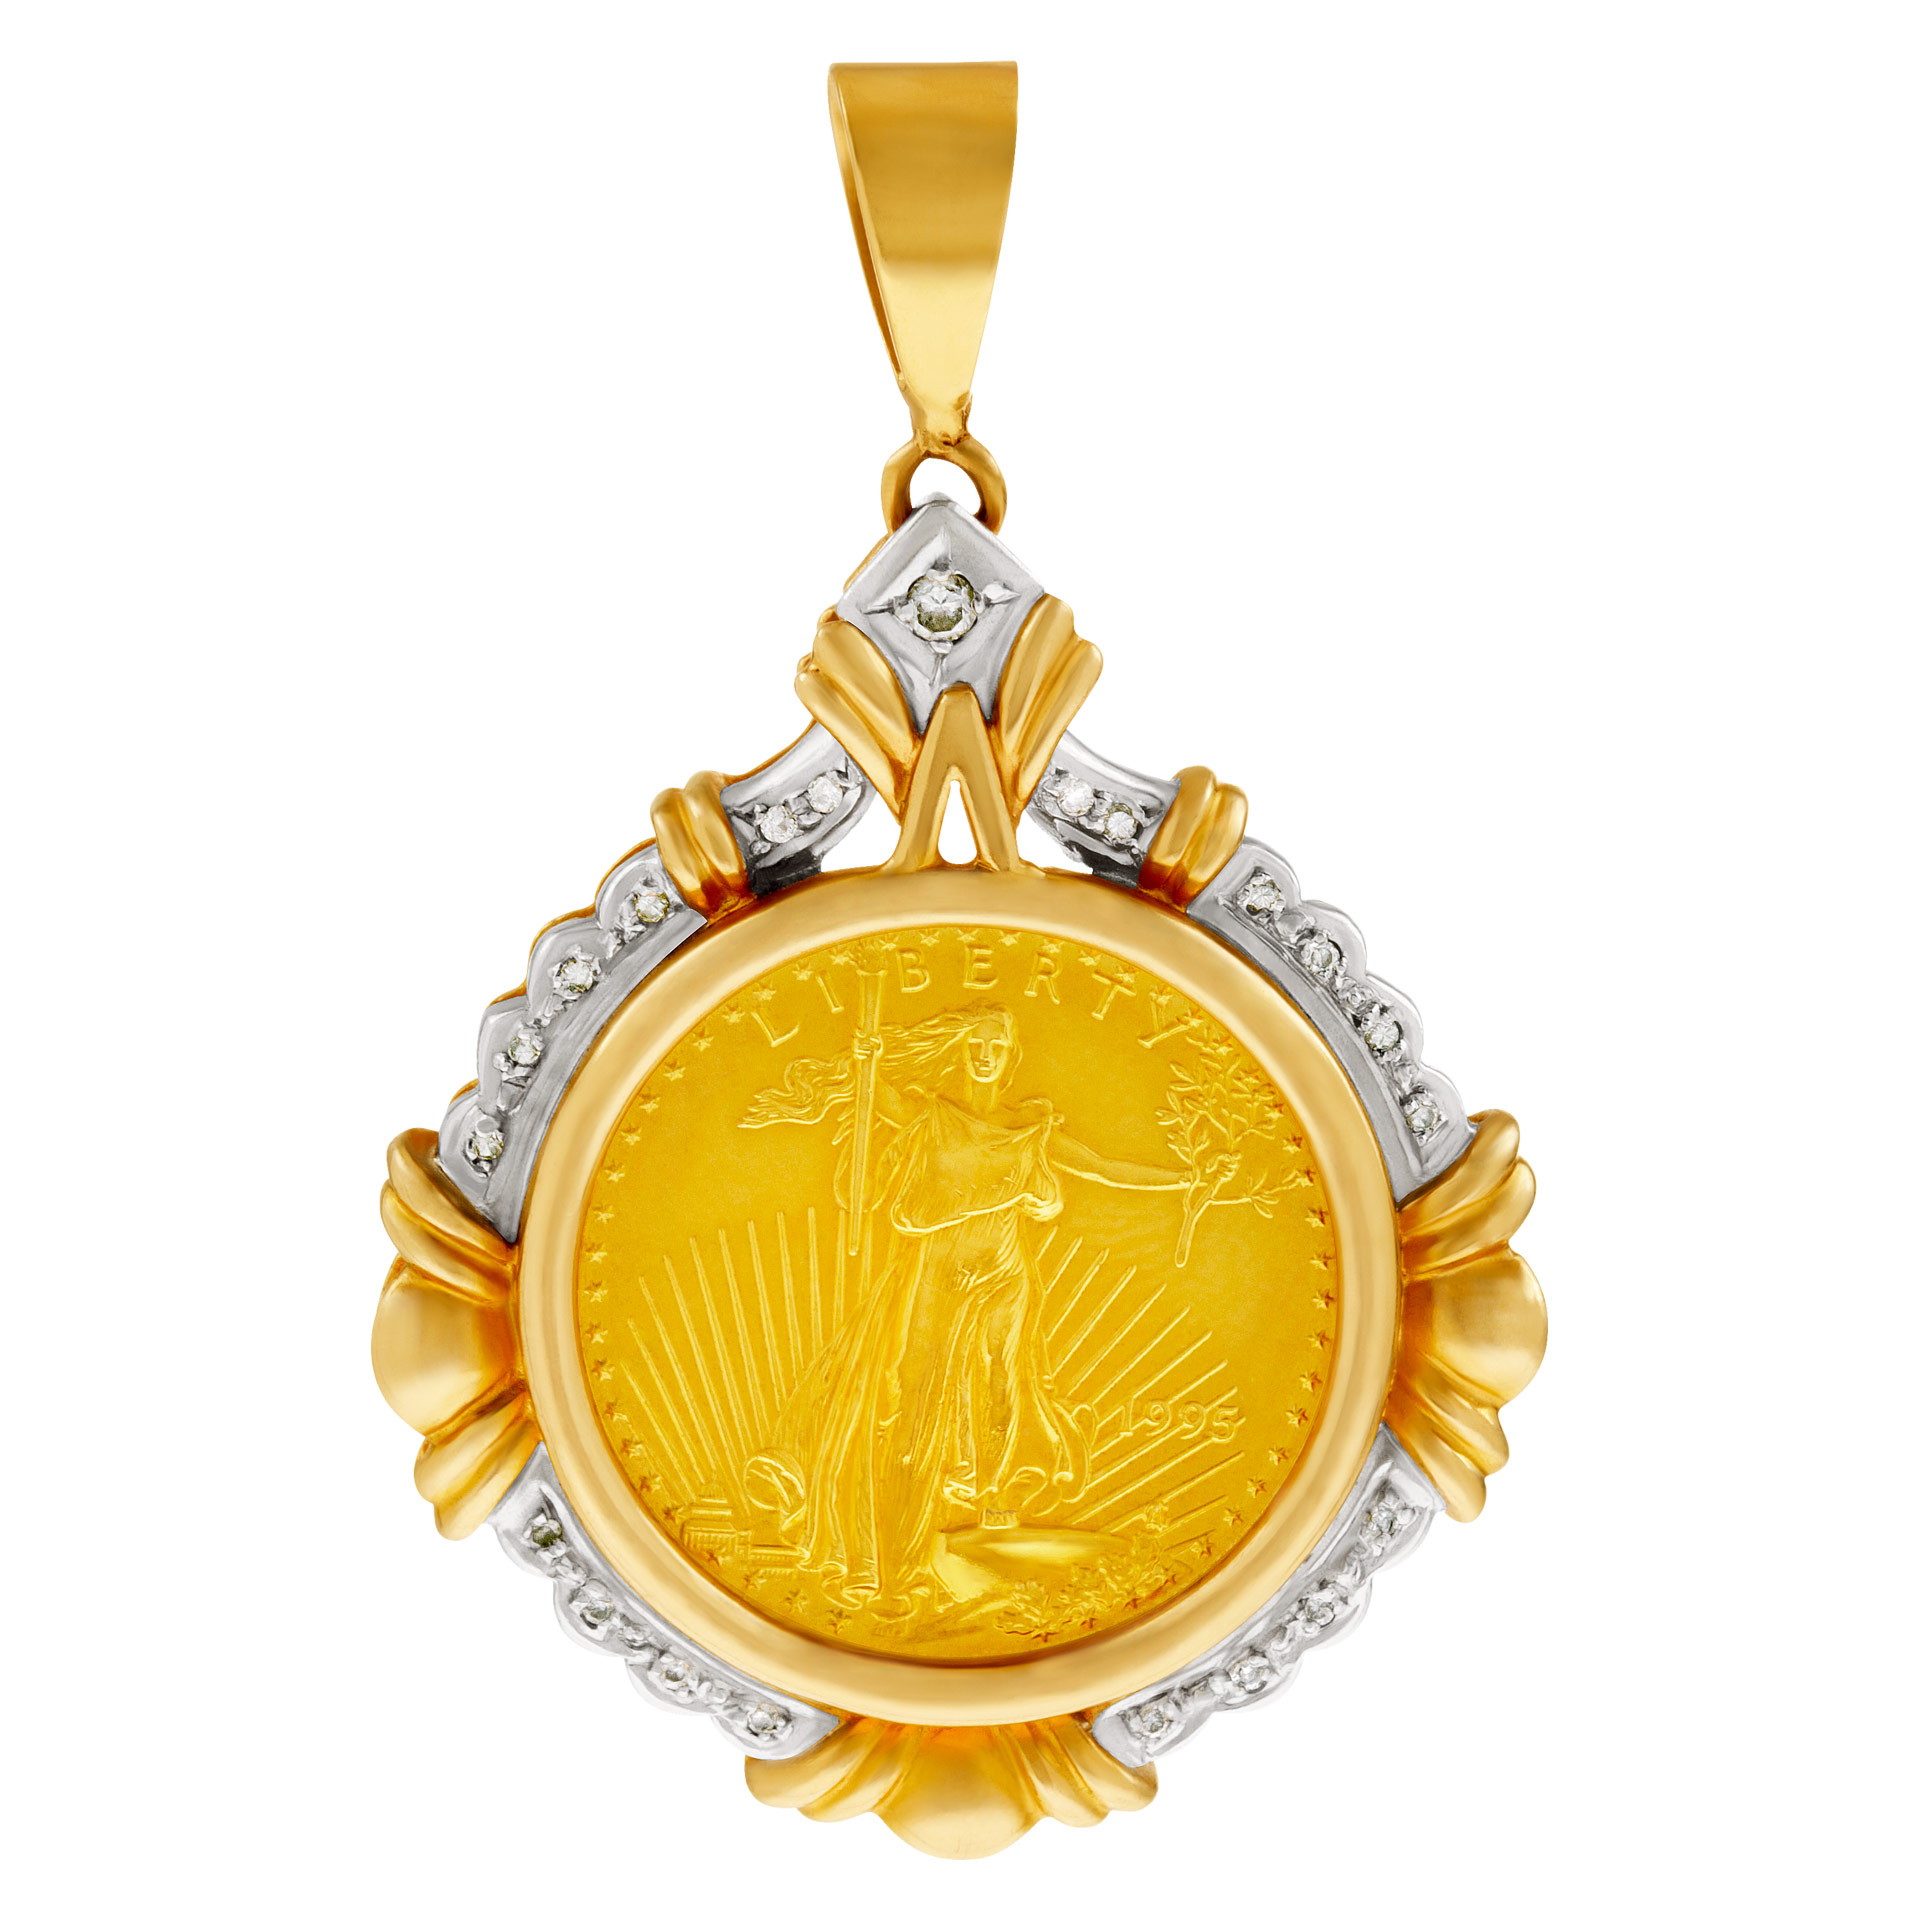 Eagle pendant $10 gold coin in 14k yellow gold and diamonds image 1